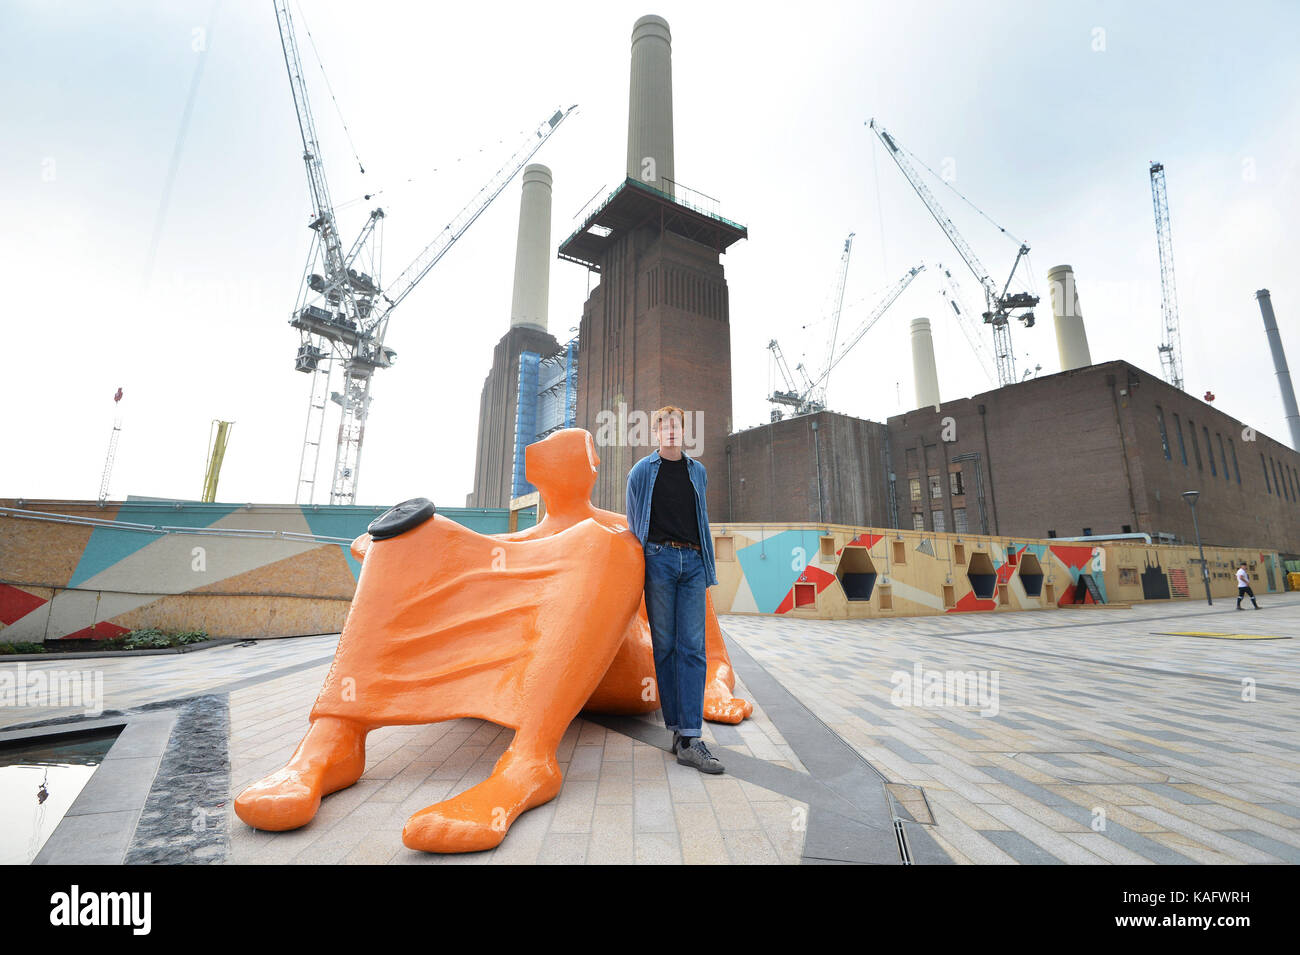 Jesse Wine stands by his Sculpture 'Local Vocals' as part of the inaugural Powerhouse Commission on the embankment in front of Battersea Power Station, London. Stock Photo